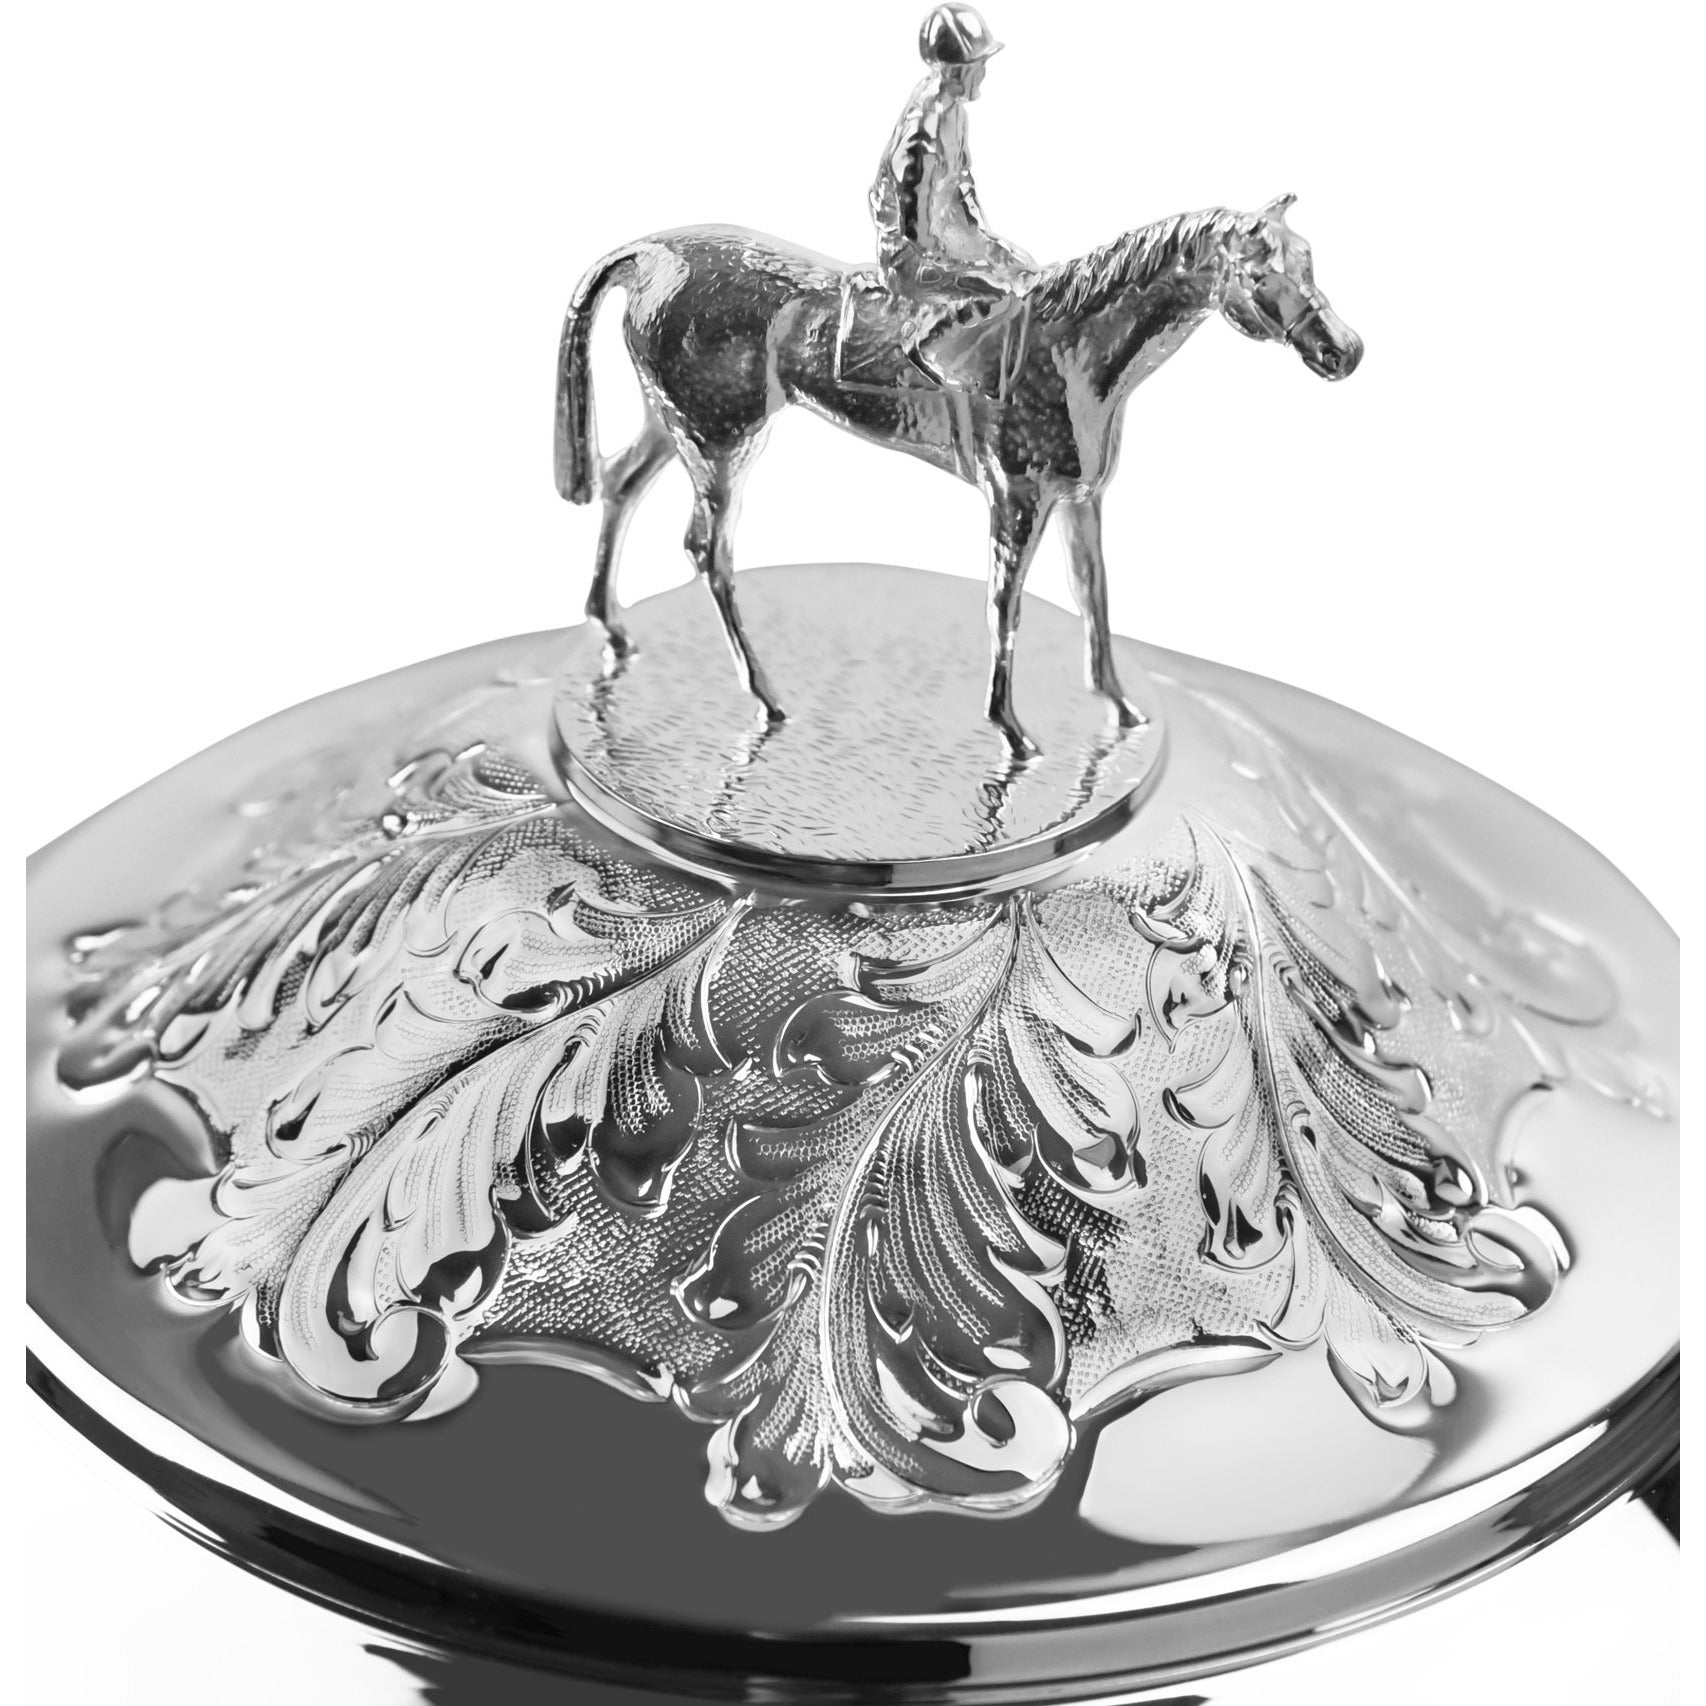 Imperial 23in Hand-Chased Silver Plated Cup - Horse And Jockey Lid